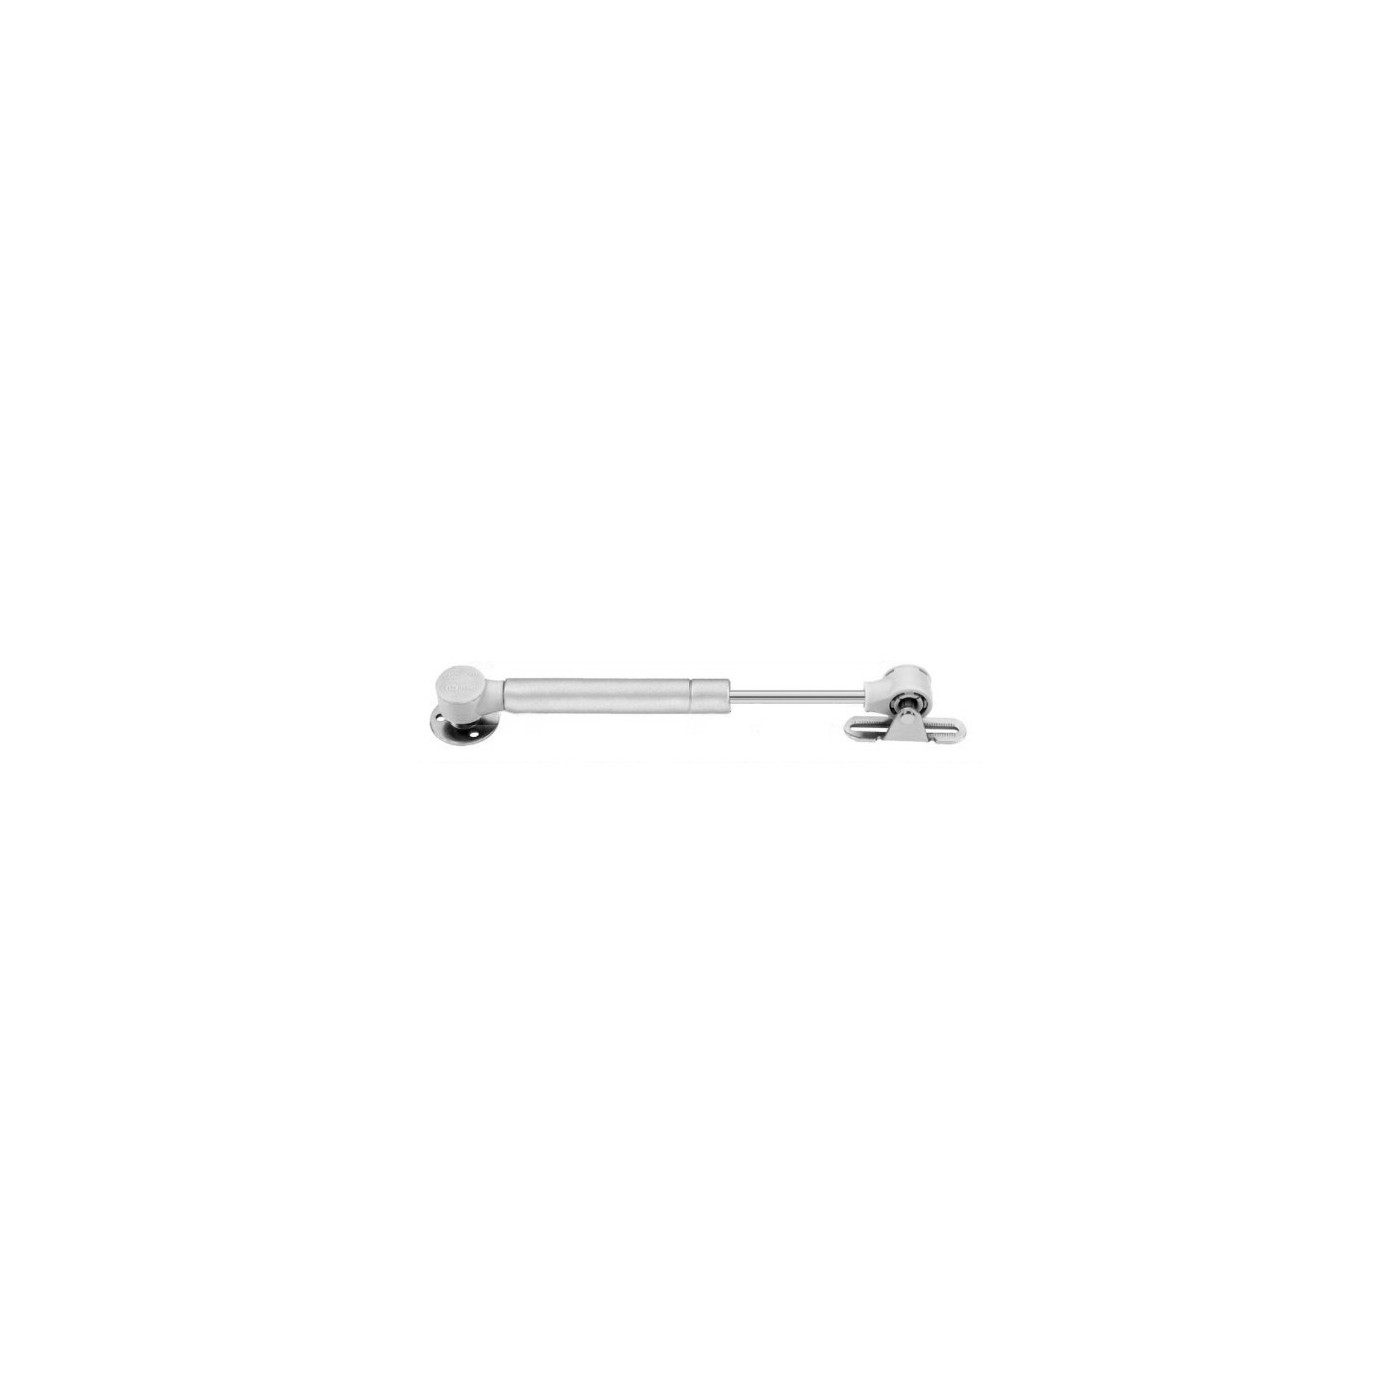 Universal gas spring with brackets (50N/5kg, 172 mm, silver)